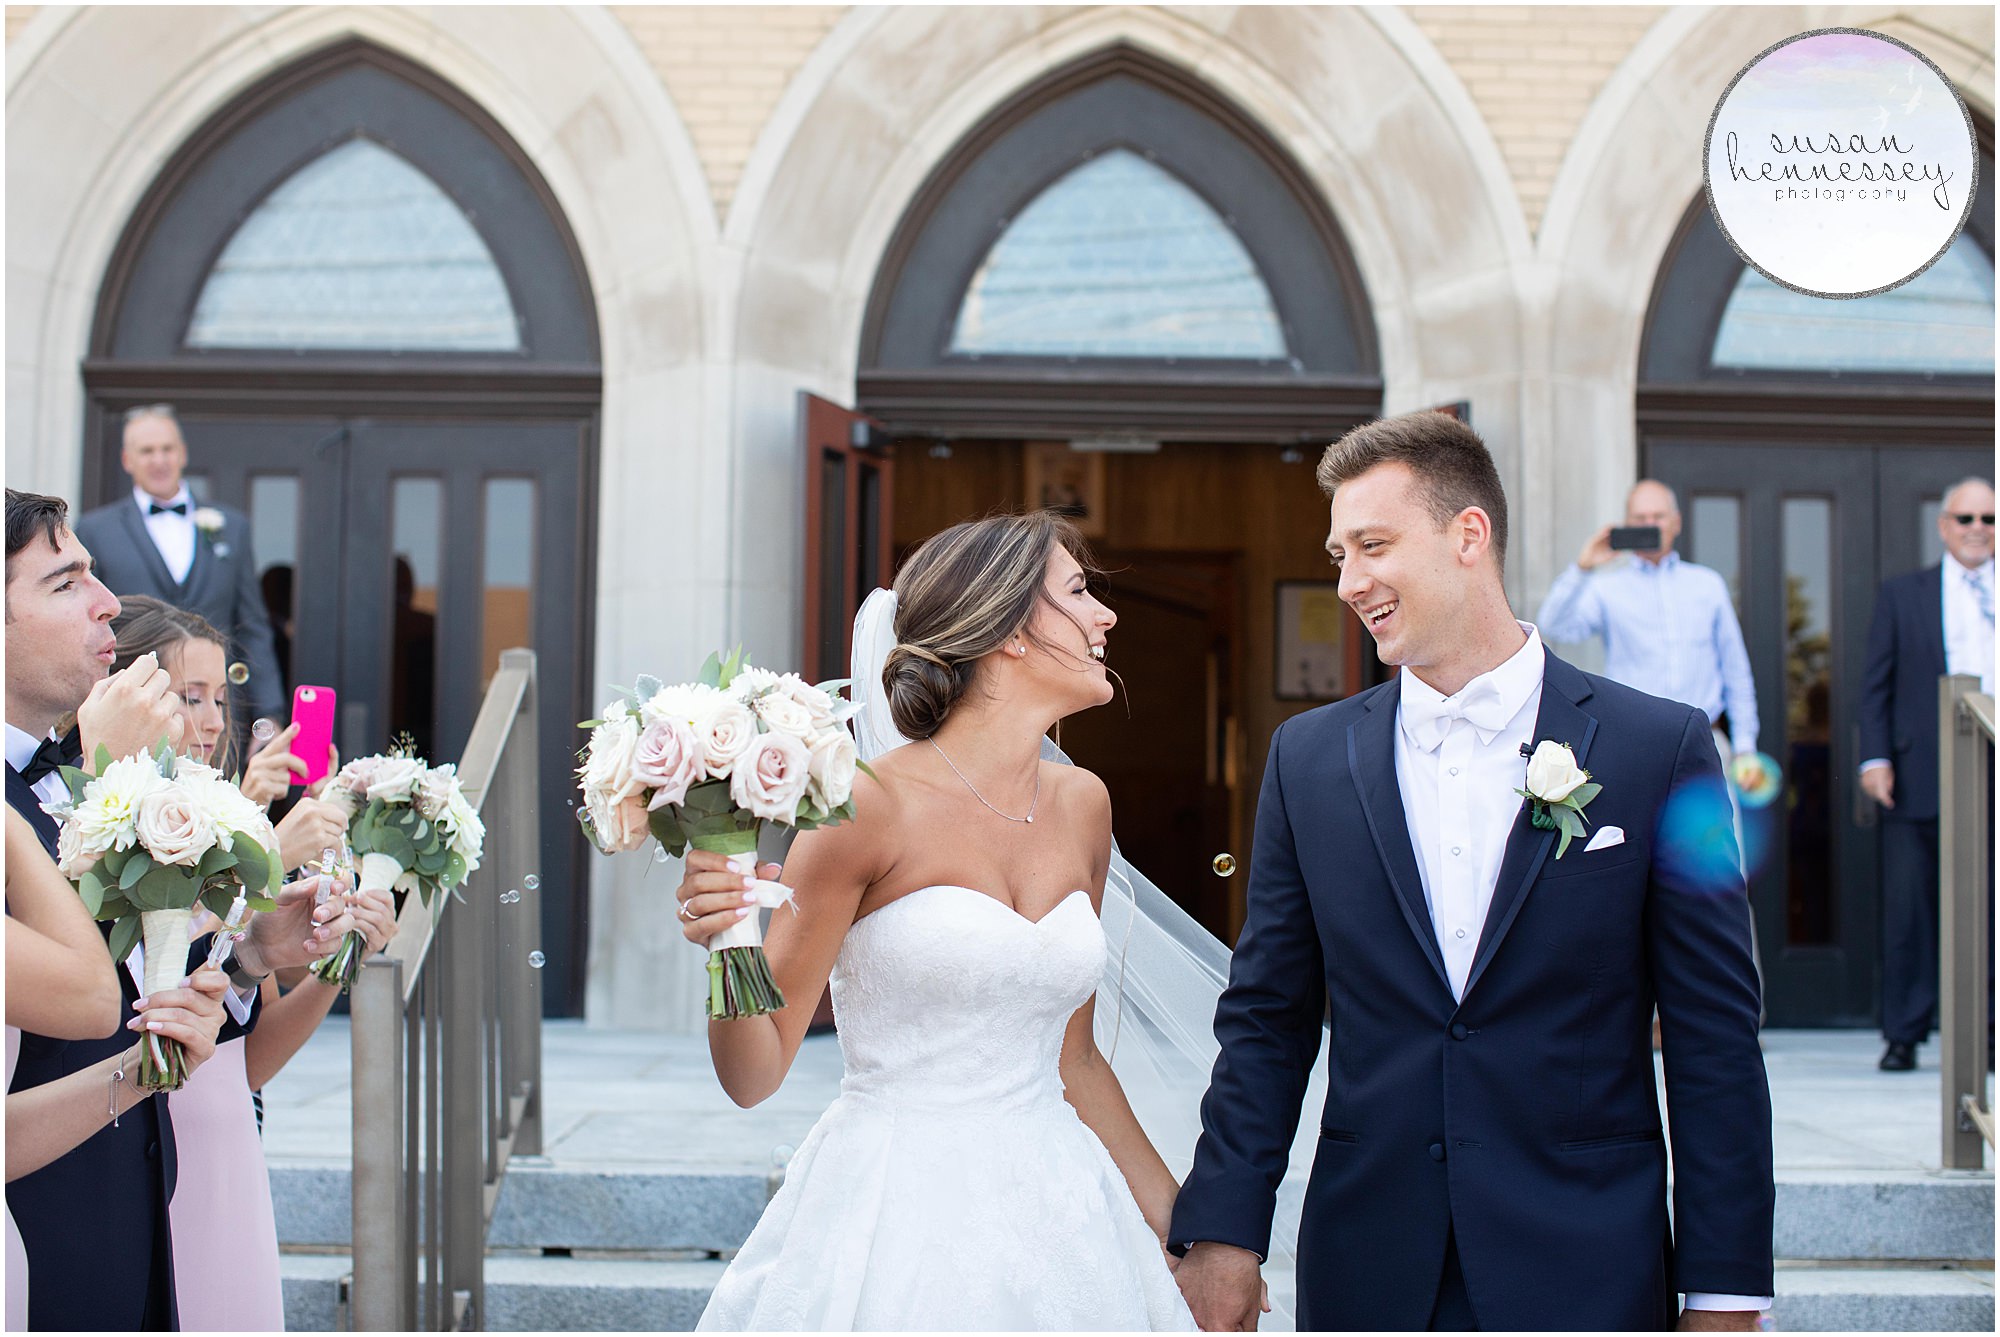 Spring Lake wedding with ceremony at St. Pio Of Pietrelcina in Lavallette, NJ